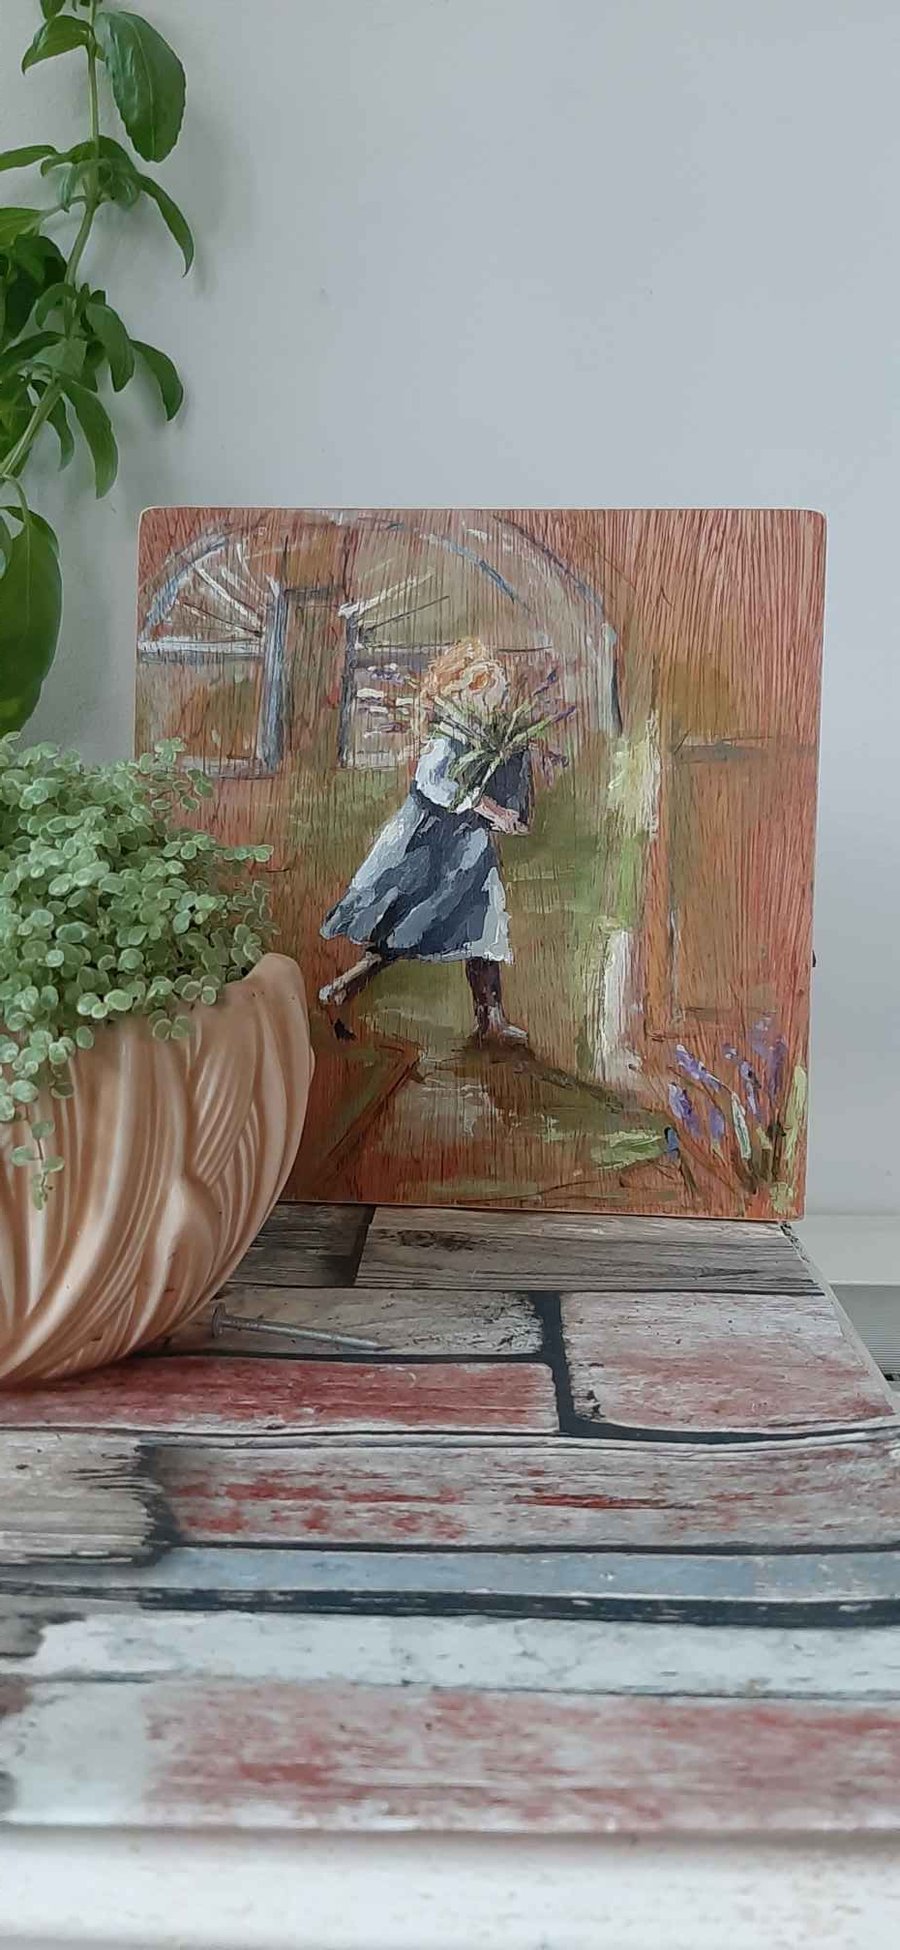 The flower grower painting on wood